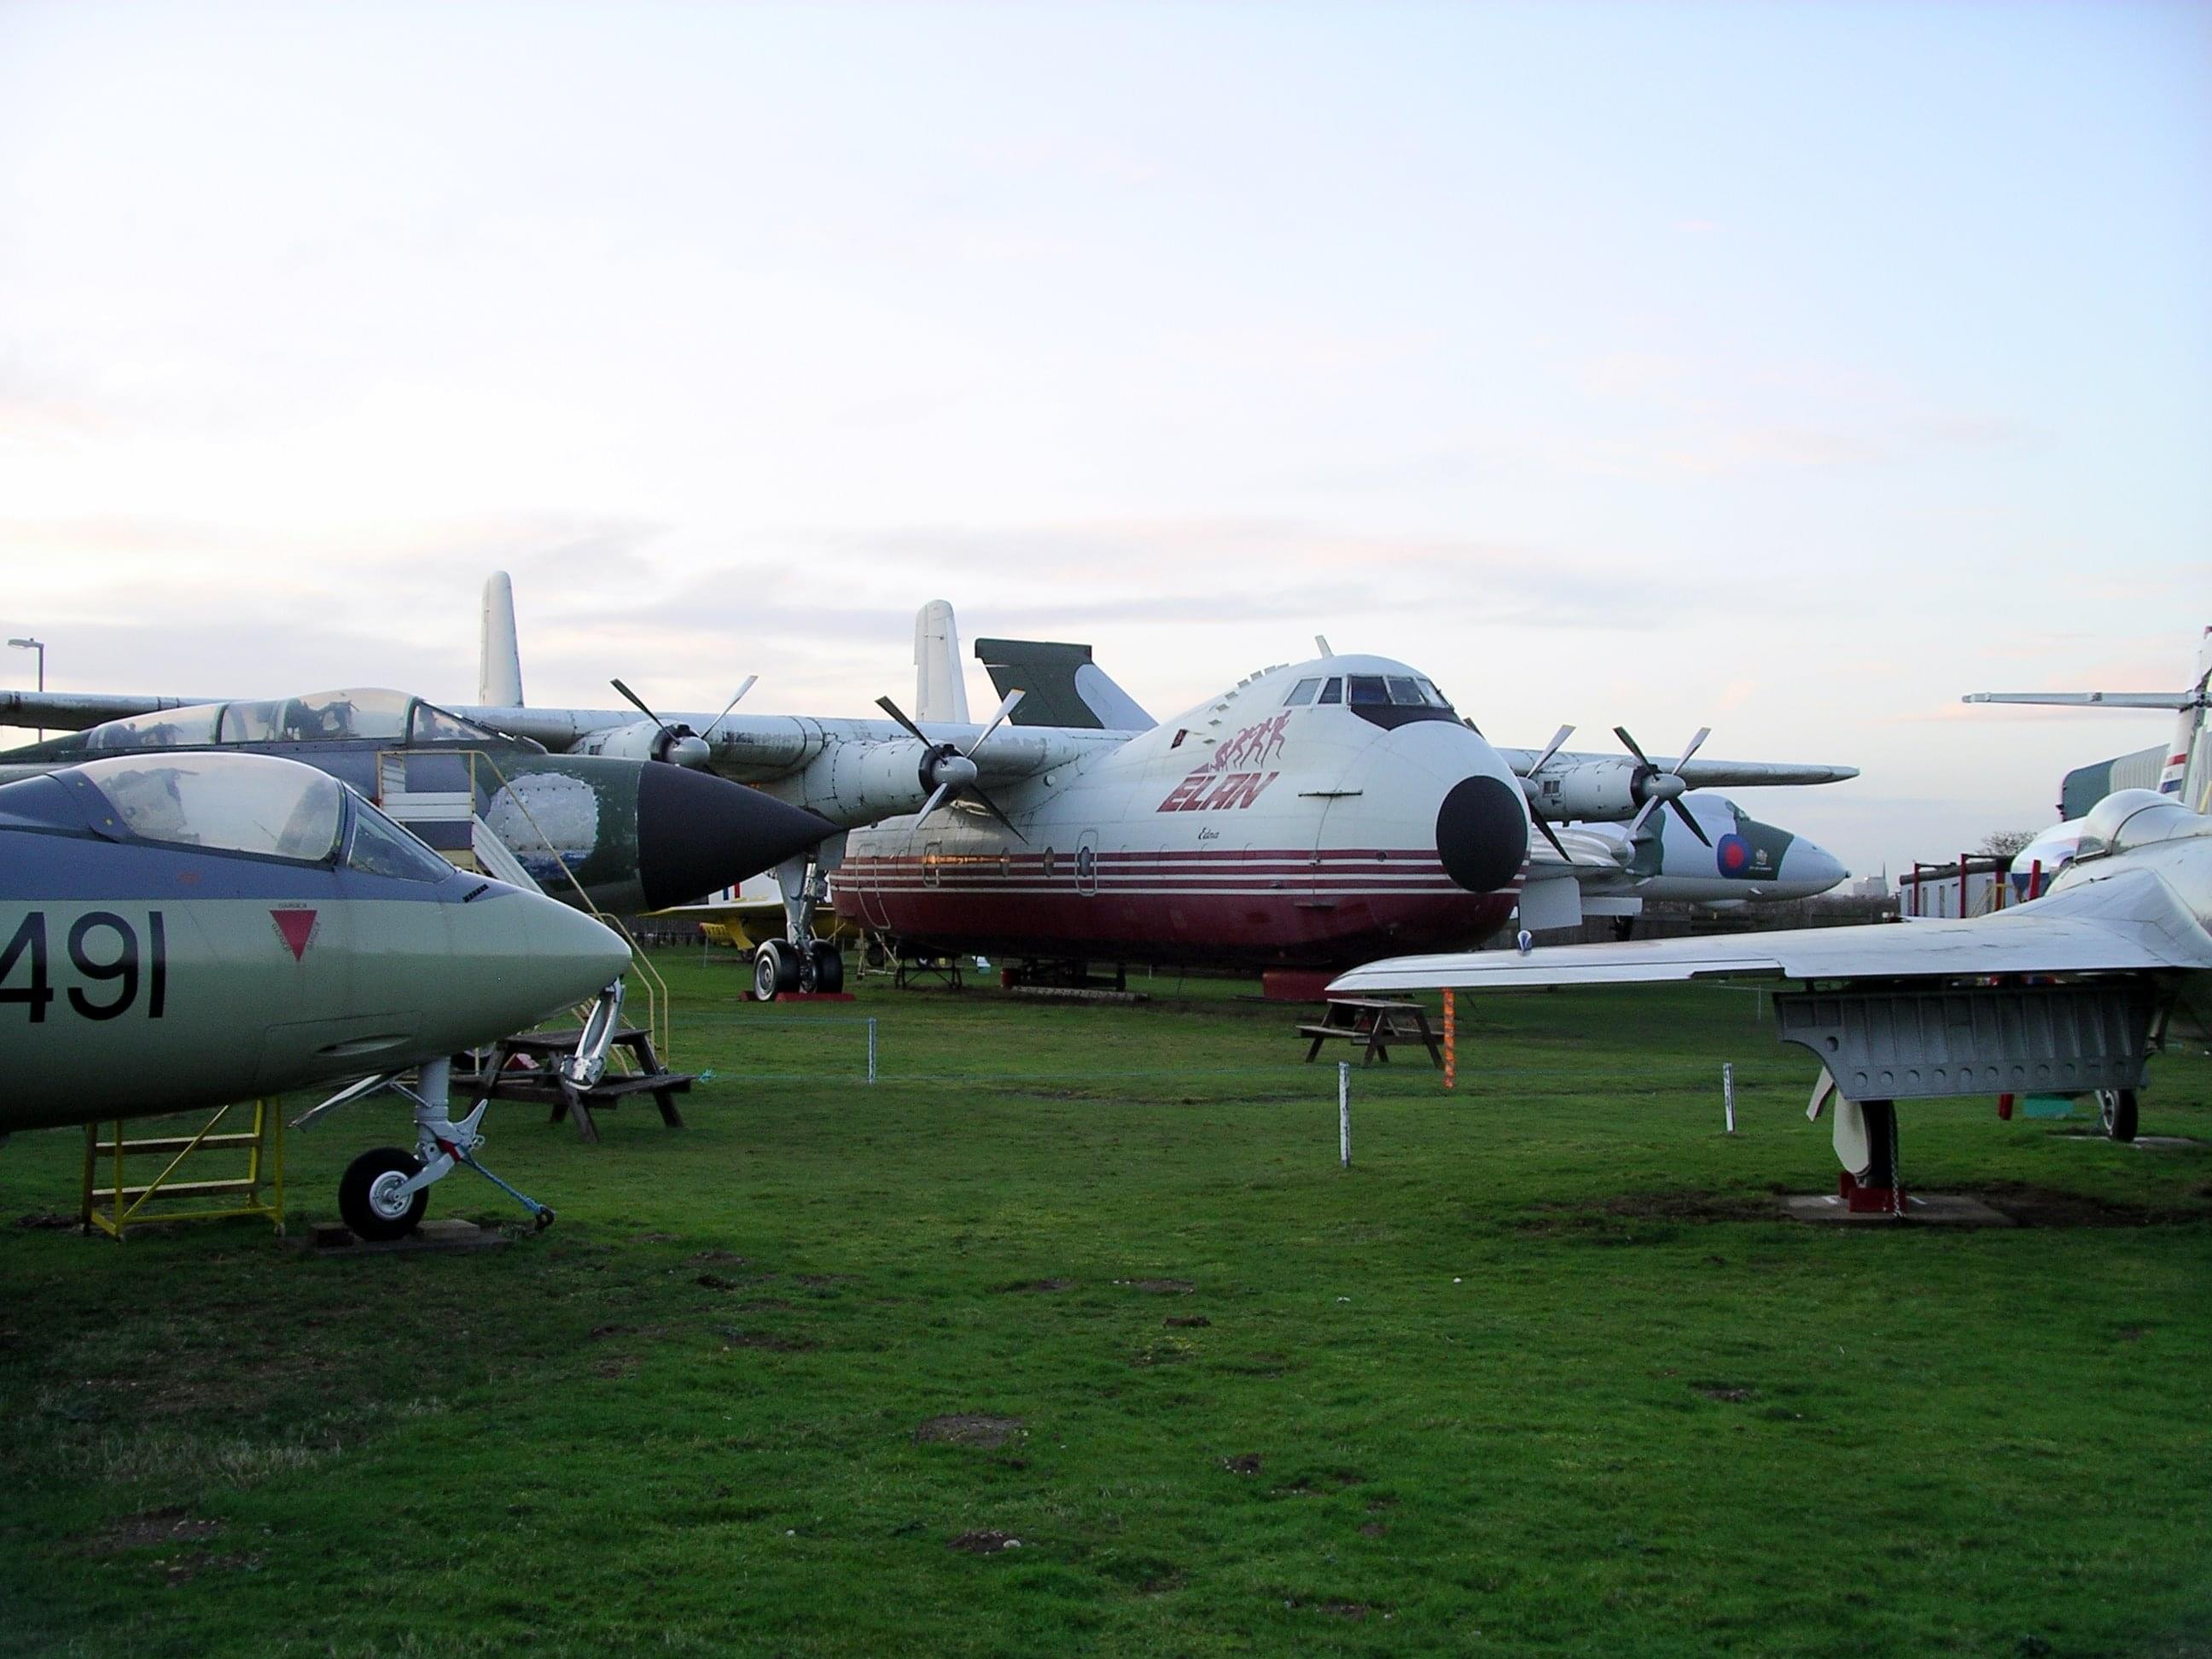 Midland Air Museum Overview